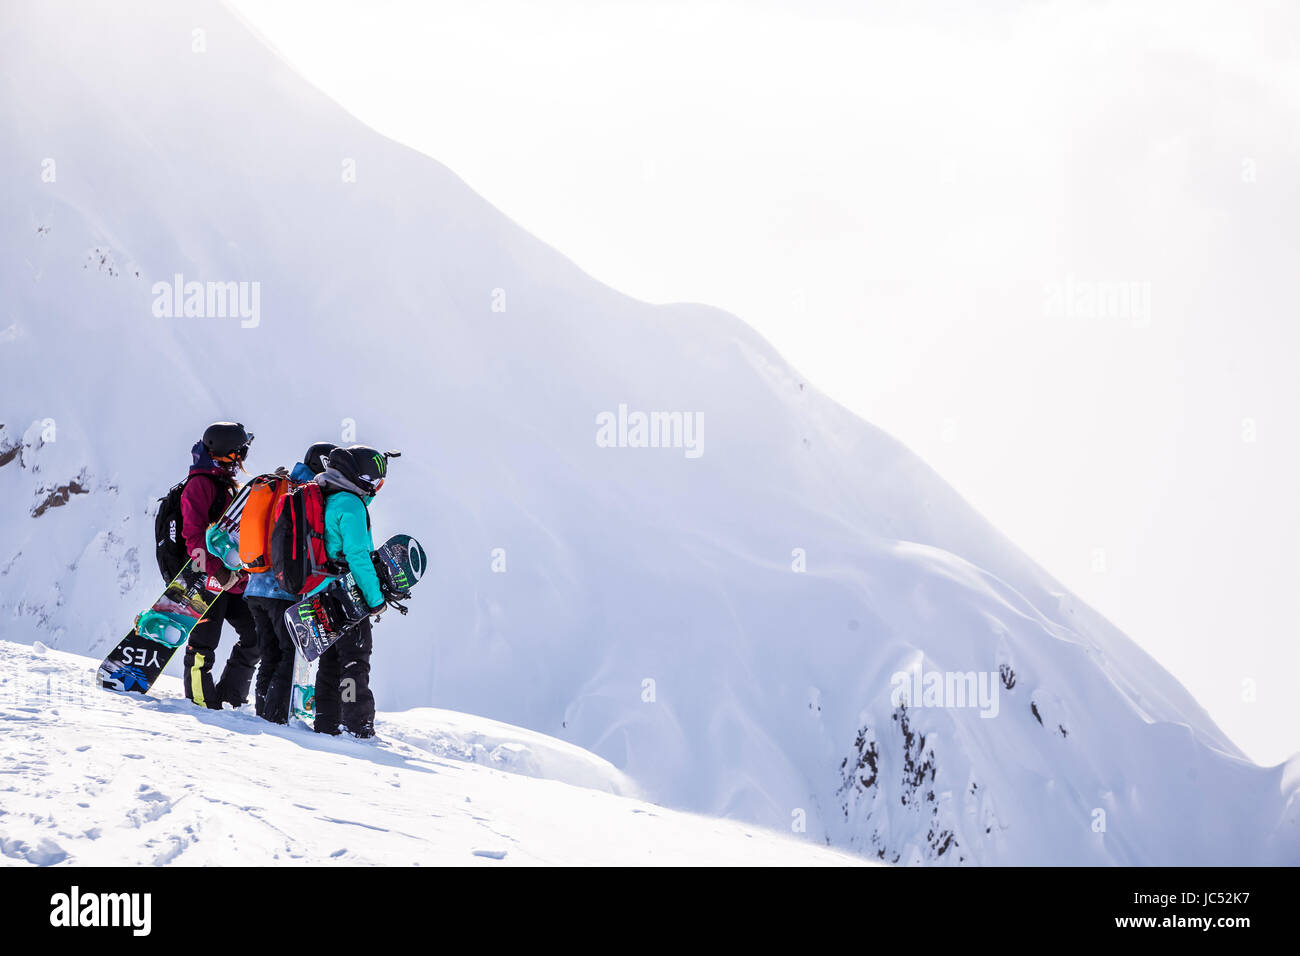 Professional snowboarders Robin Van Gyn, Helen Schettini, and Jamie Anderson, stand on a ridge and look down at a line they are about to ride on a sunny day in Haines, Alaska. Stock Photo